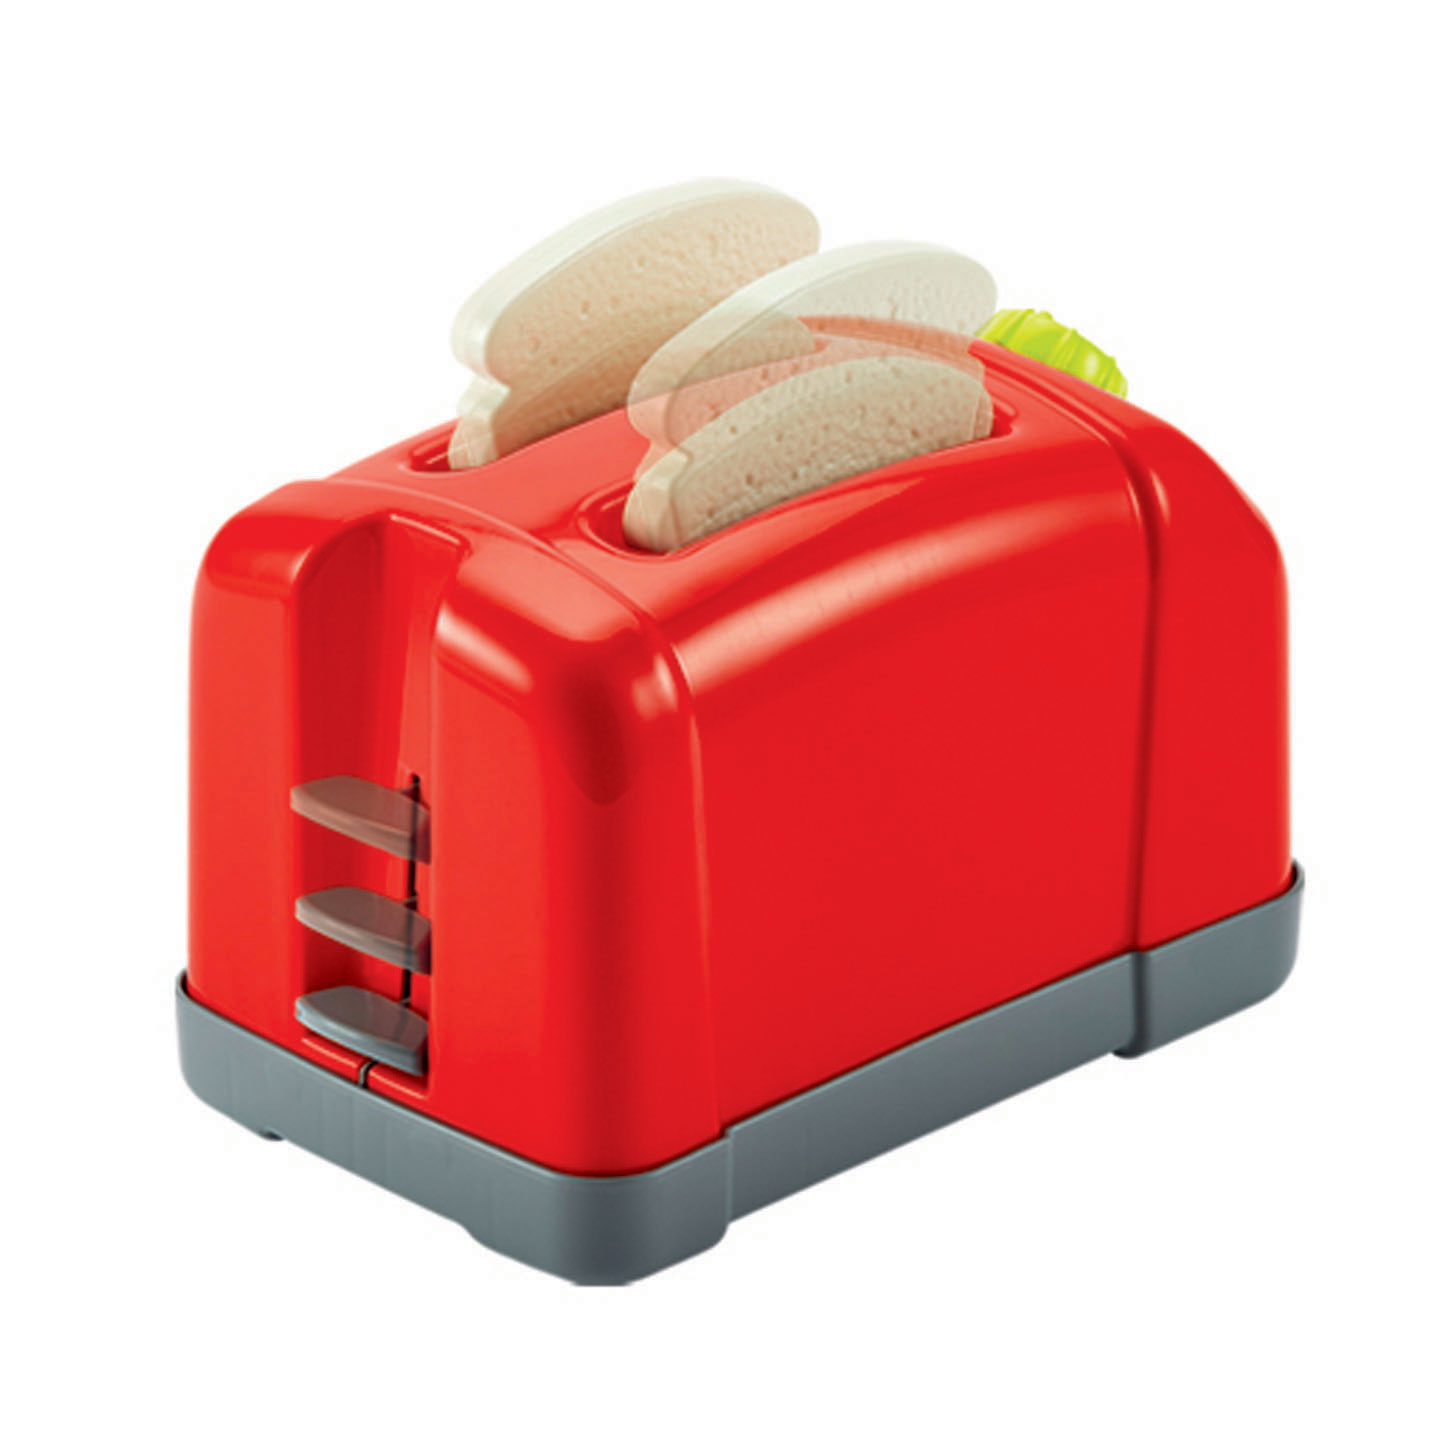 Ecoiffier 100% Chef Toaster Set